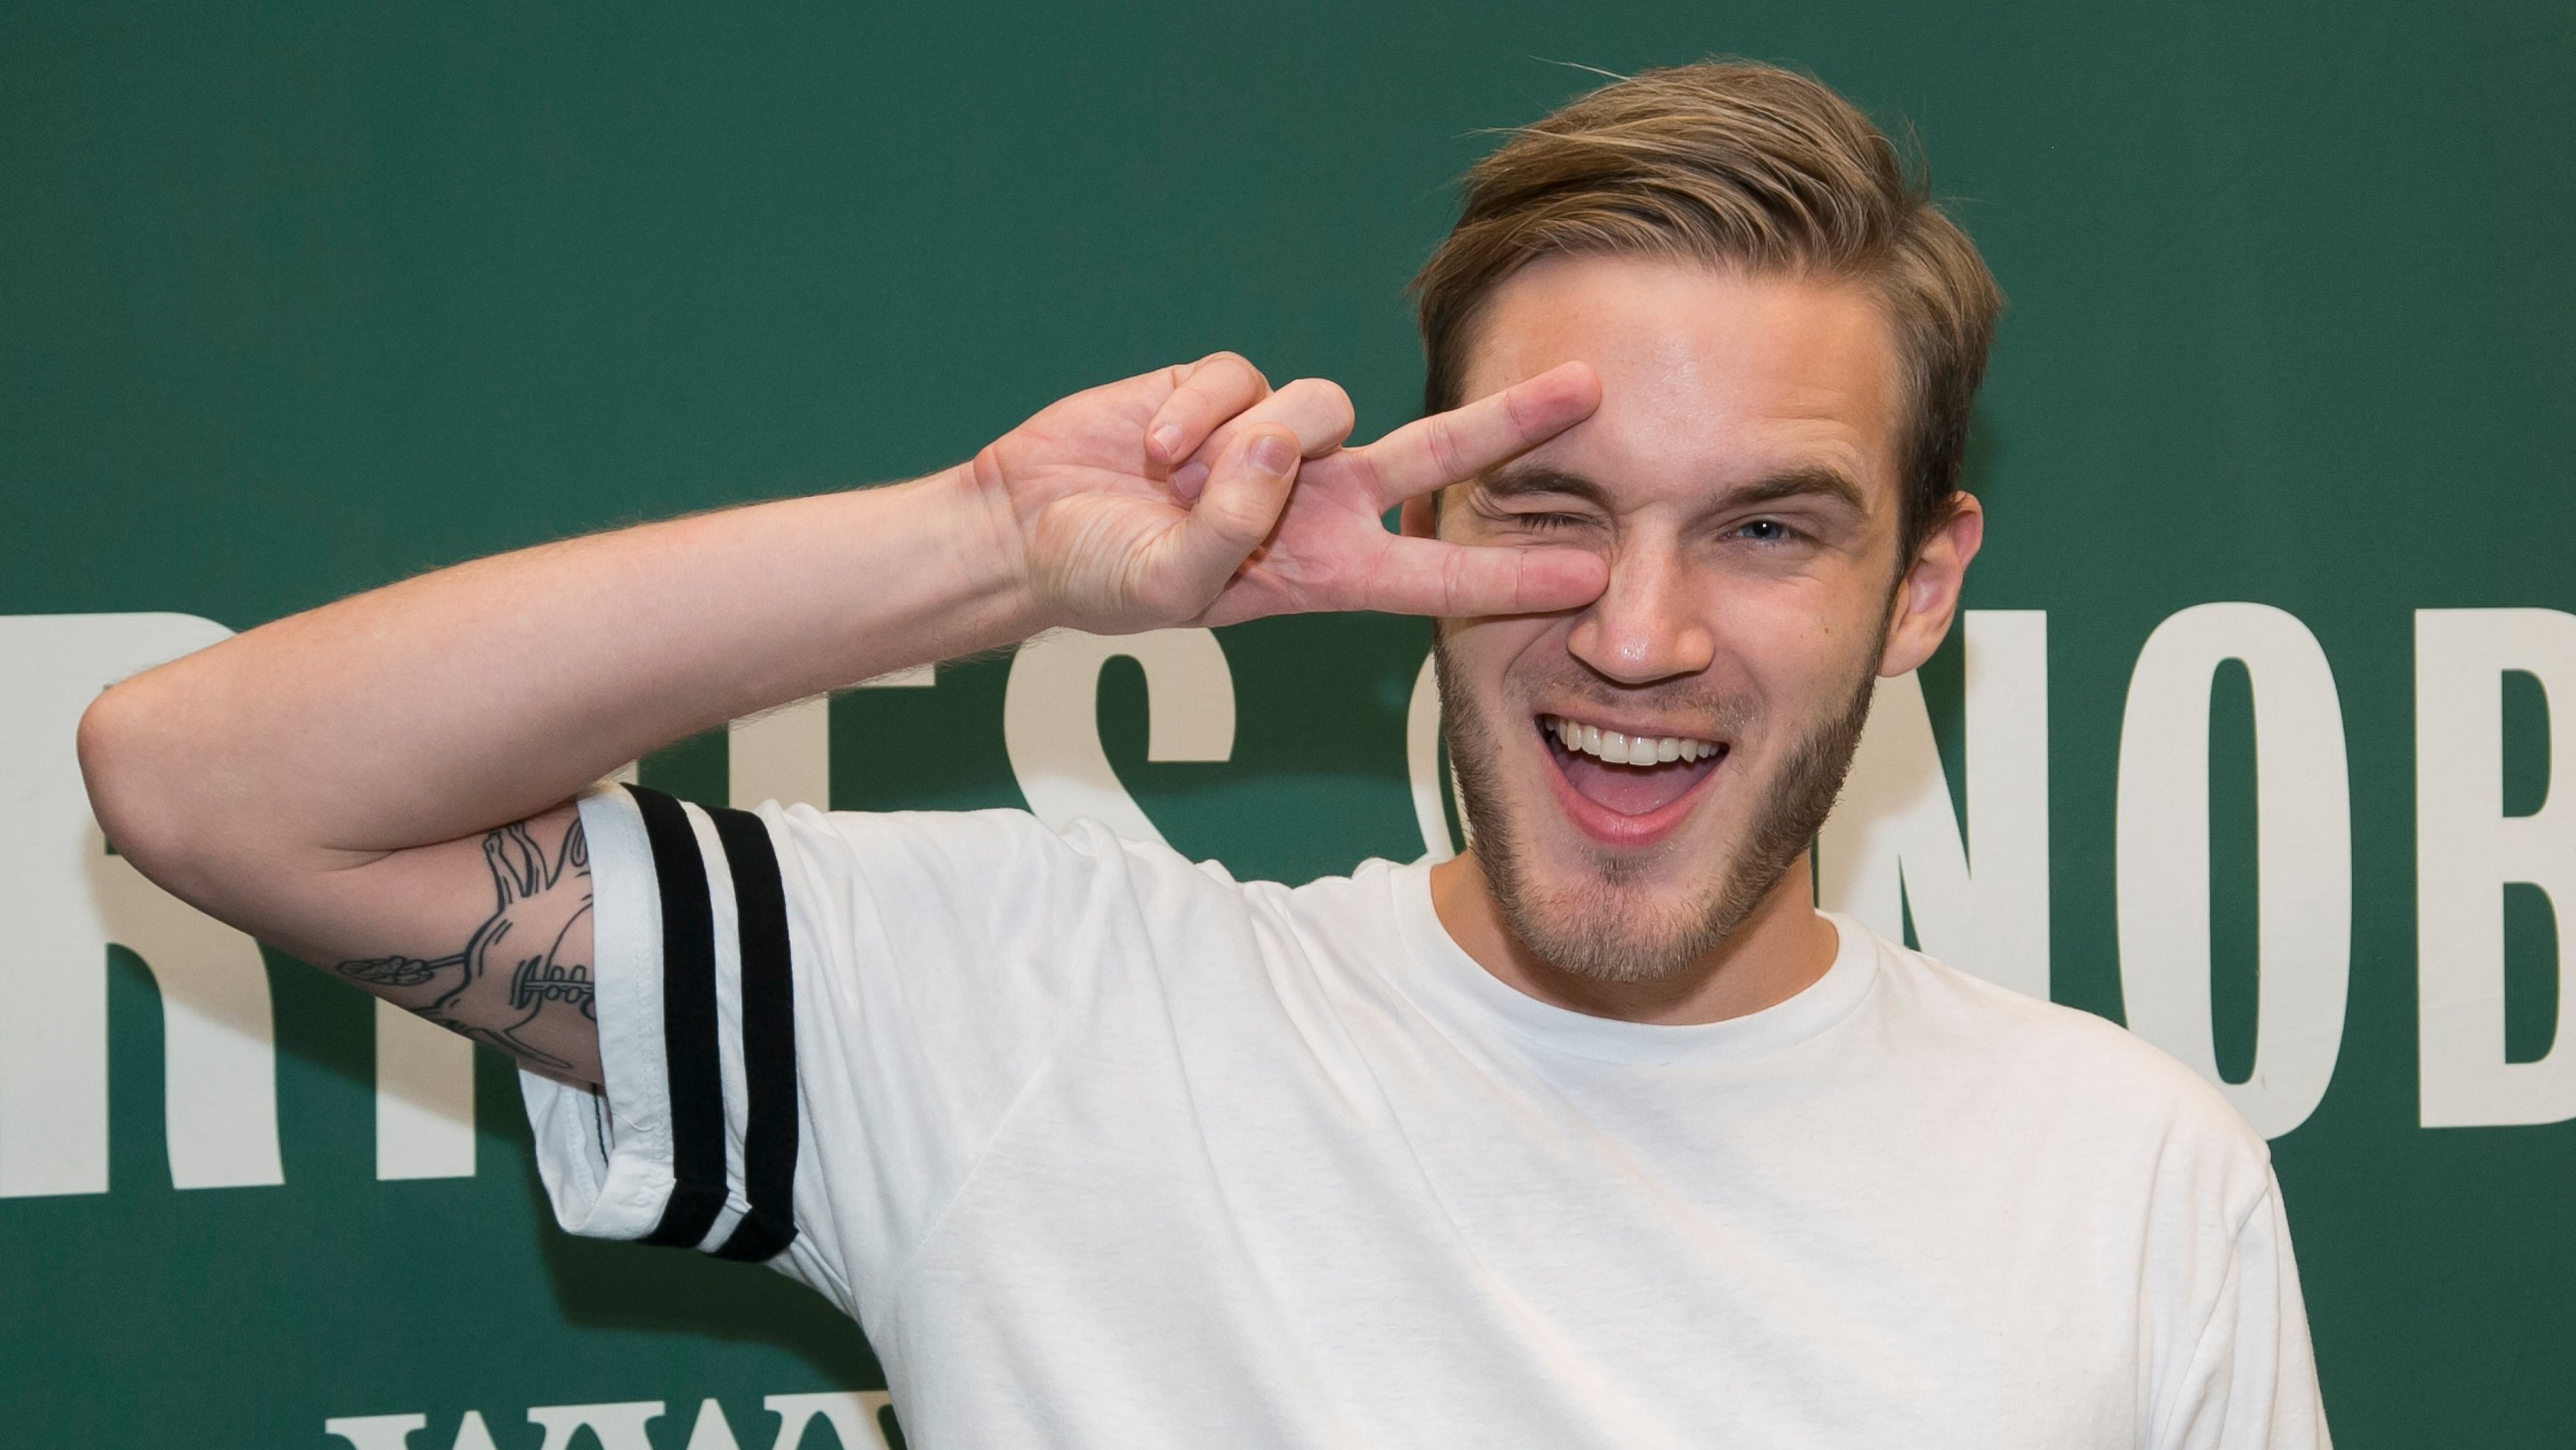 PewDiePie Book Signing For &quot;This Book Loves You&quot;